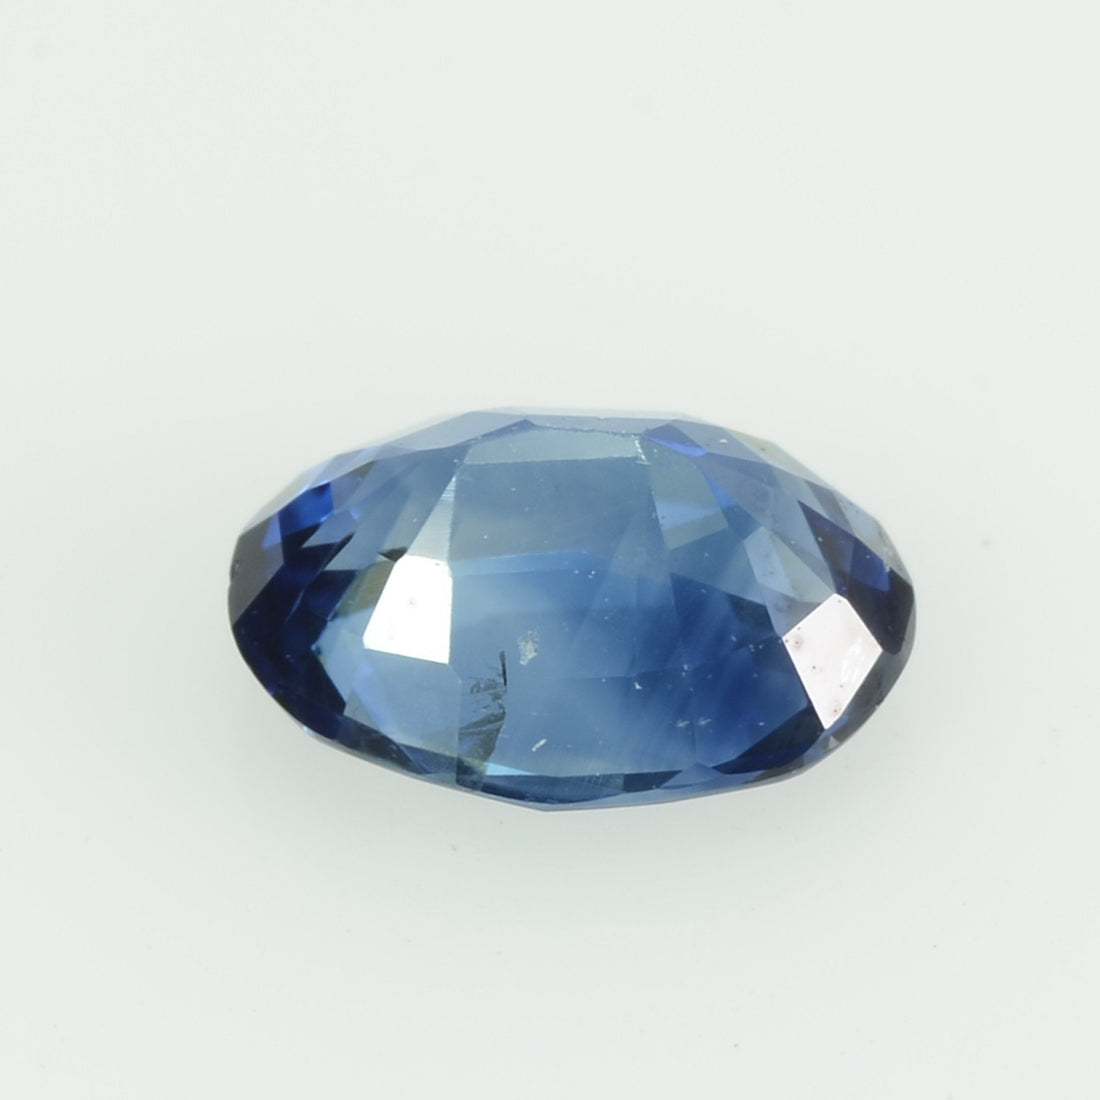 0.75 Cts Natural Blue Sapphire Loose Gemstone Oval Cut AGL Certified